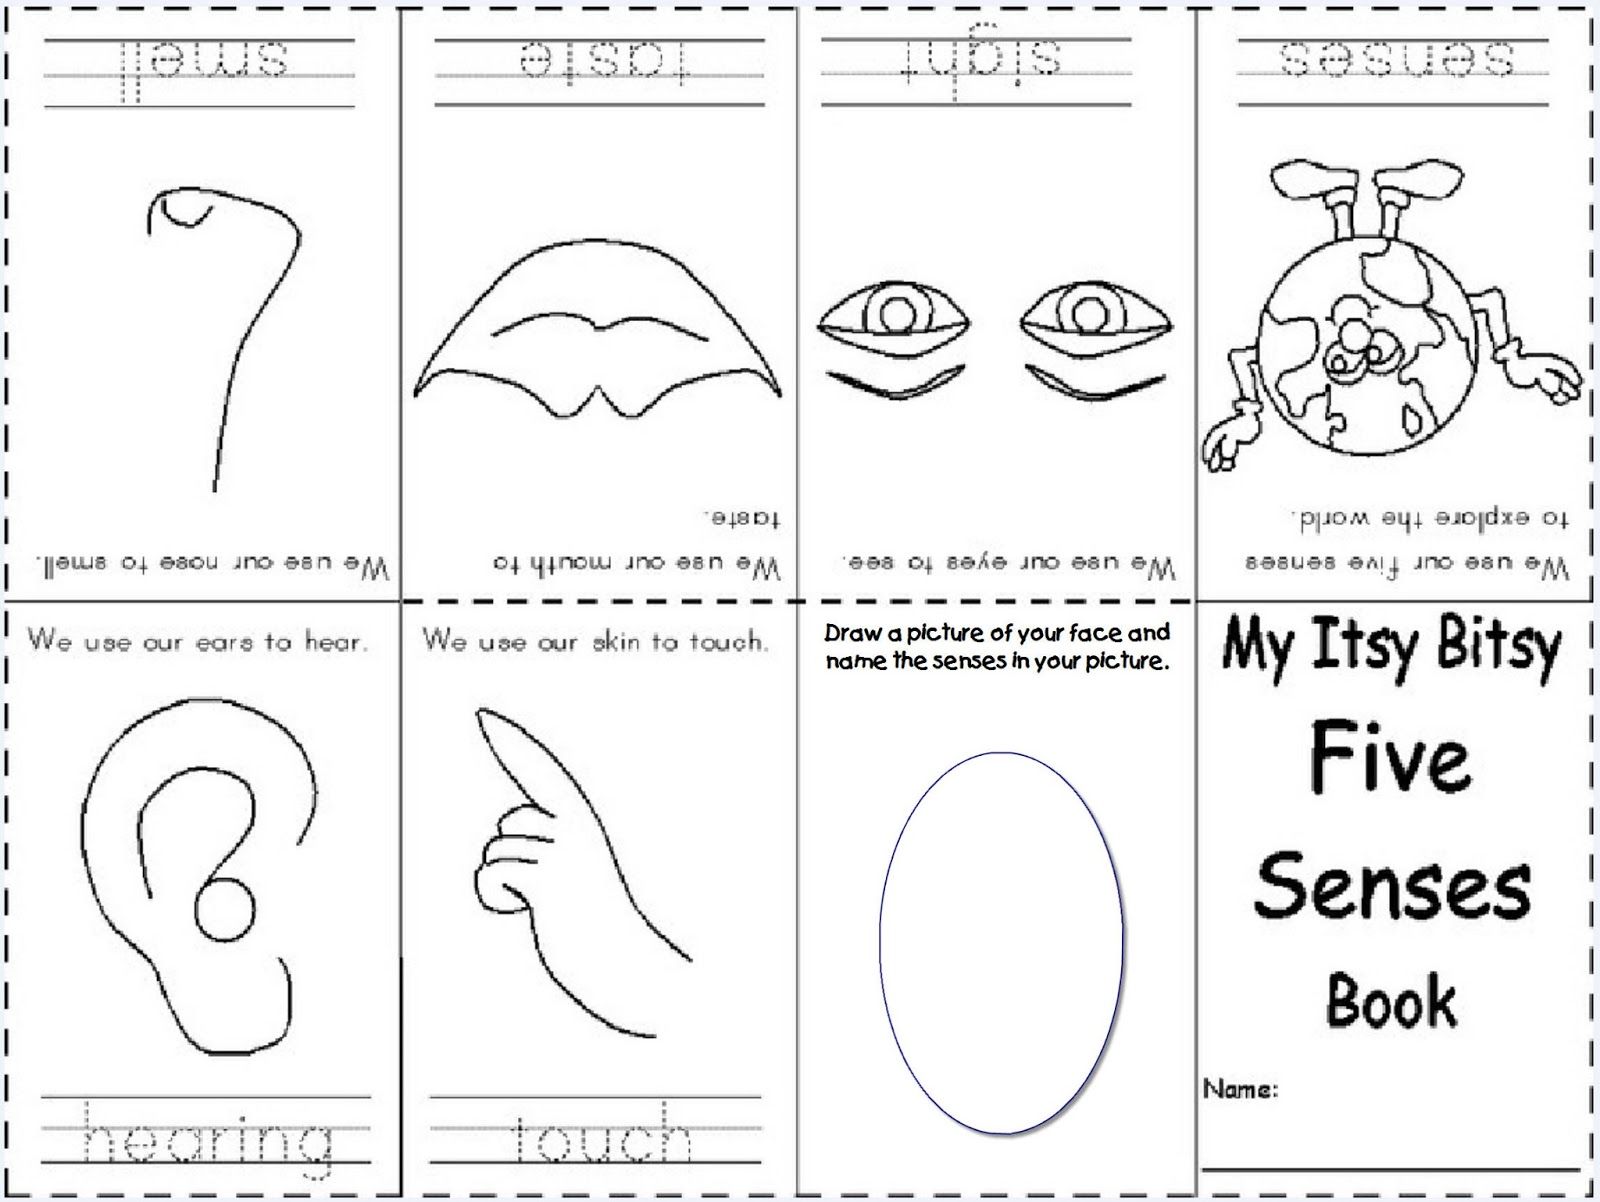 Coloring Pages Of 5 Senses - Coloring Home